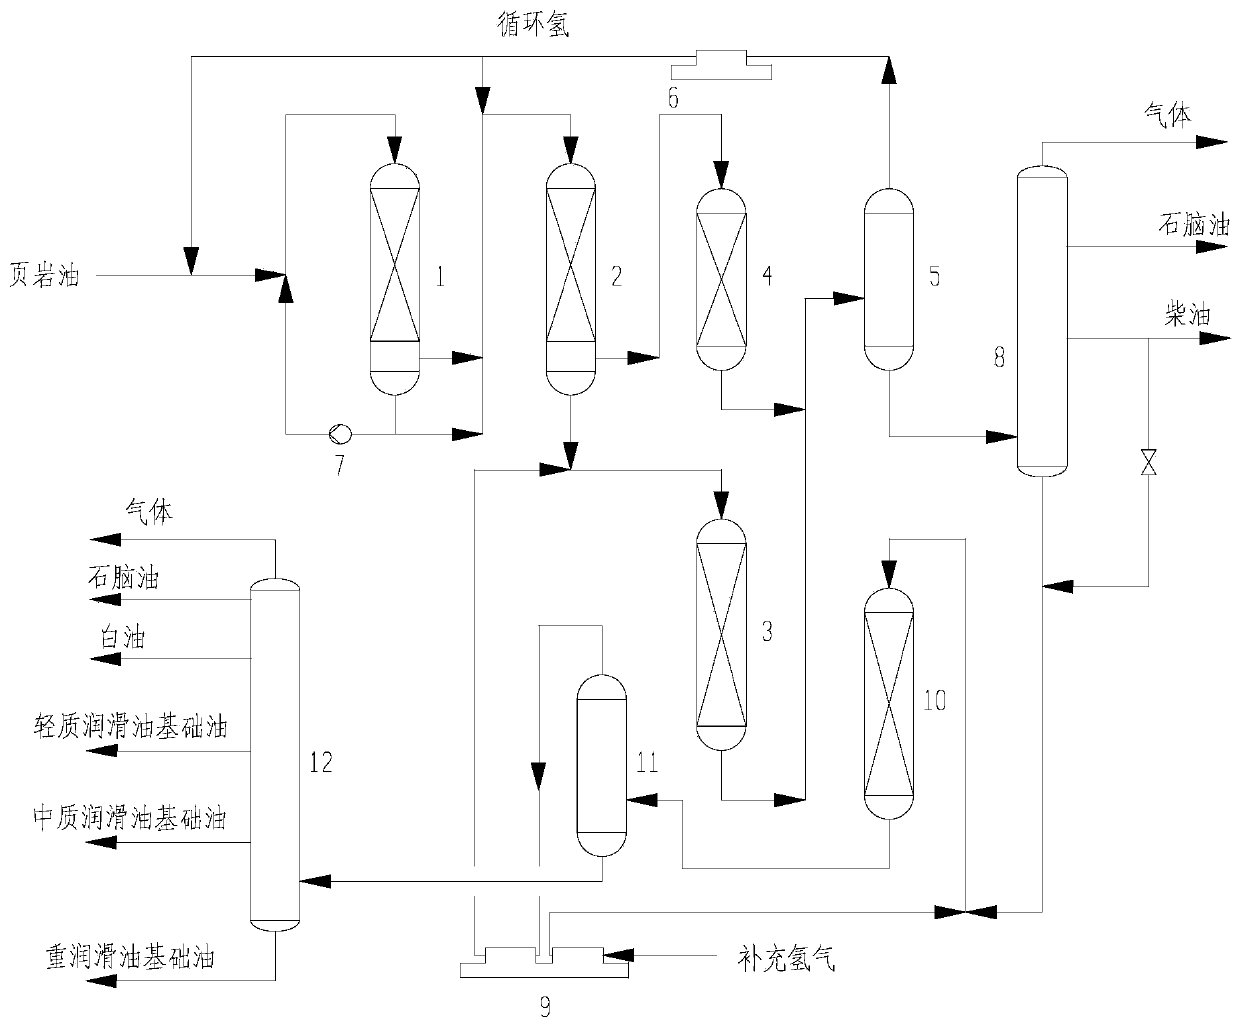 Graded reverse hydrogenation process system for shale oil